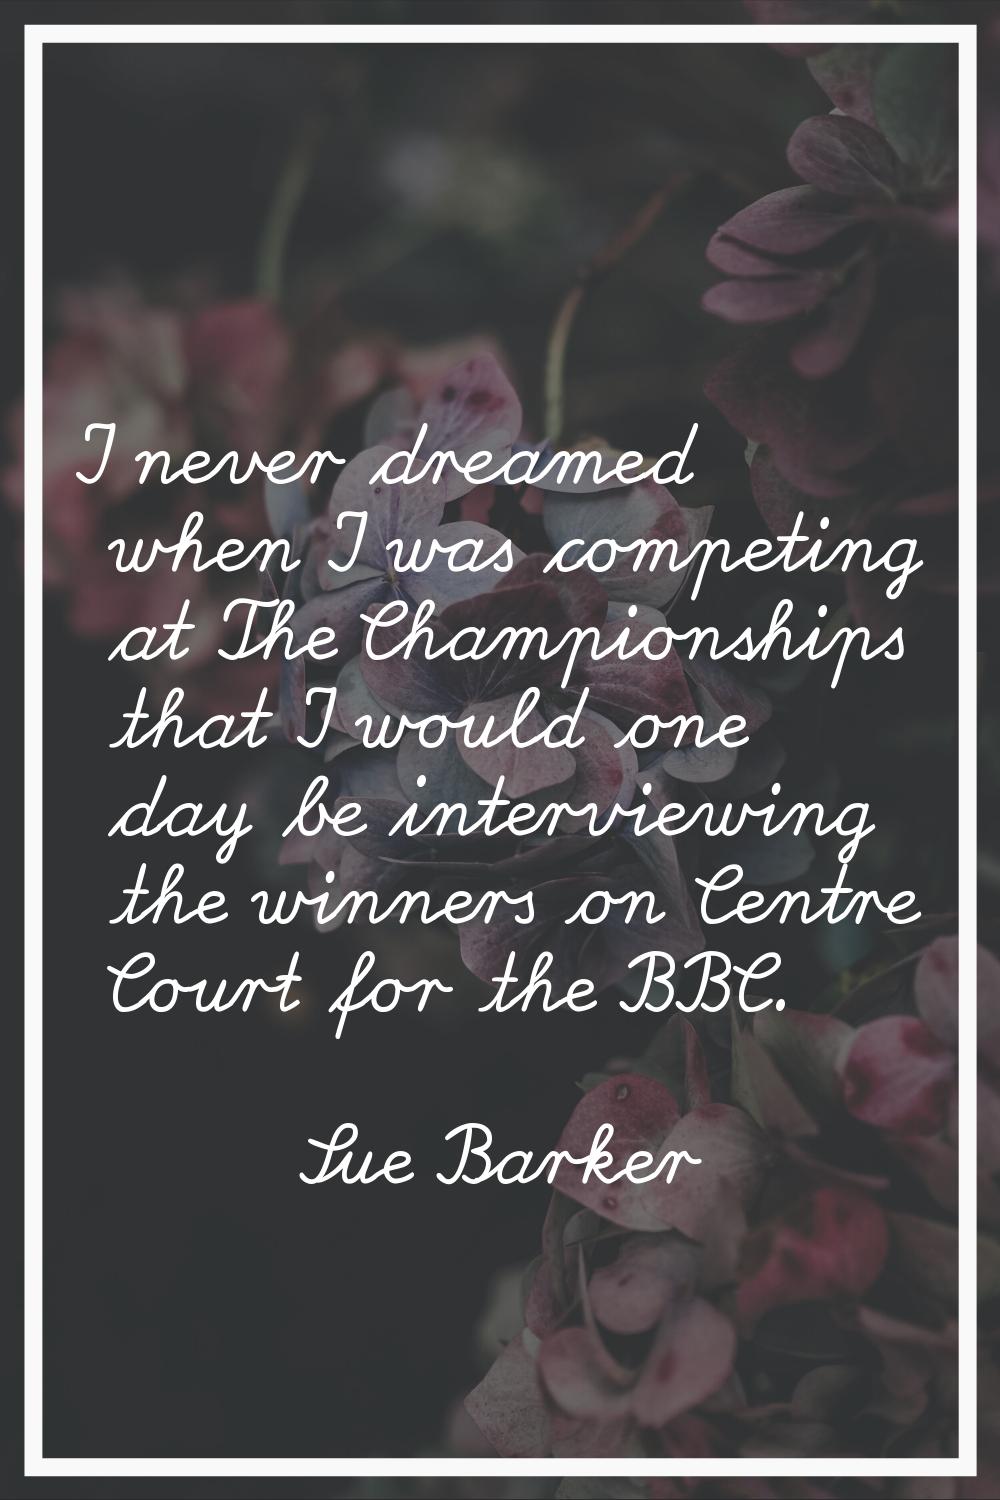 I never dreamed when I was competing at The Championships that I would one day be interviewing the 